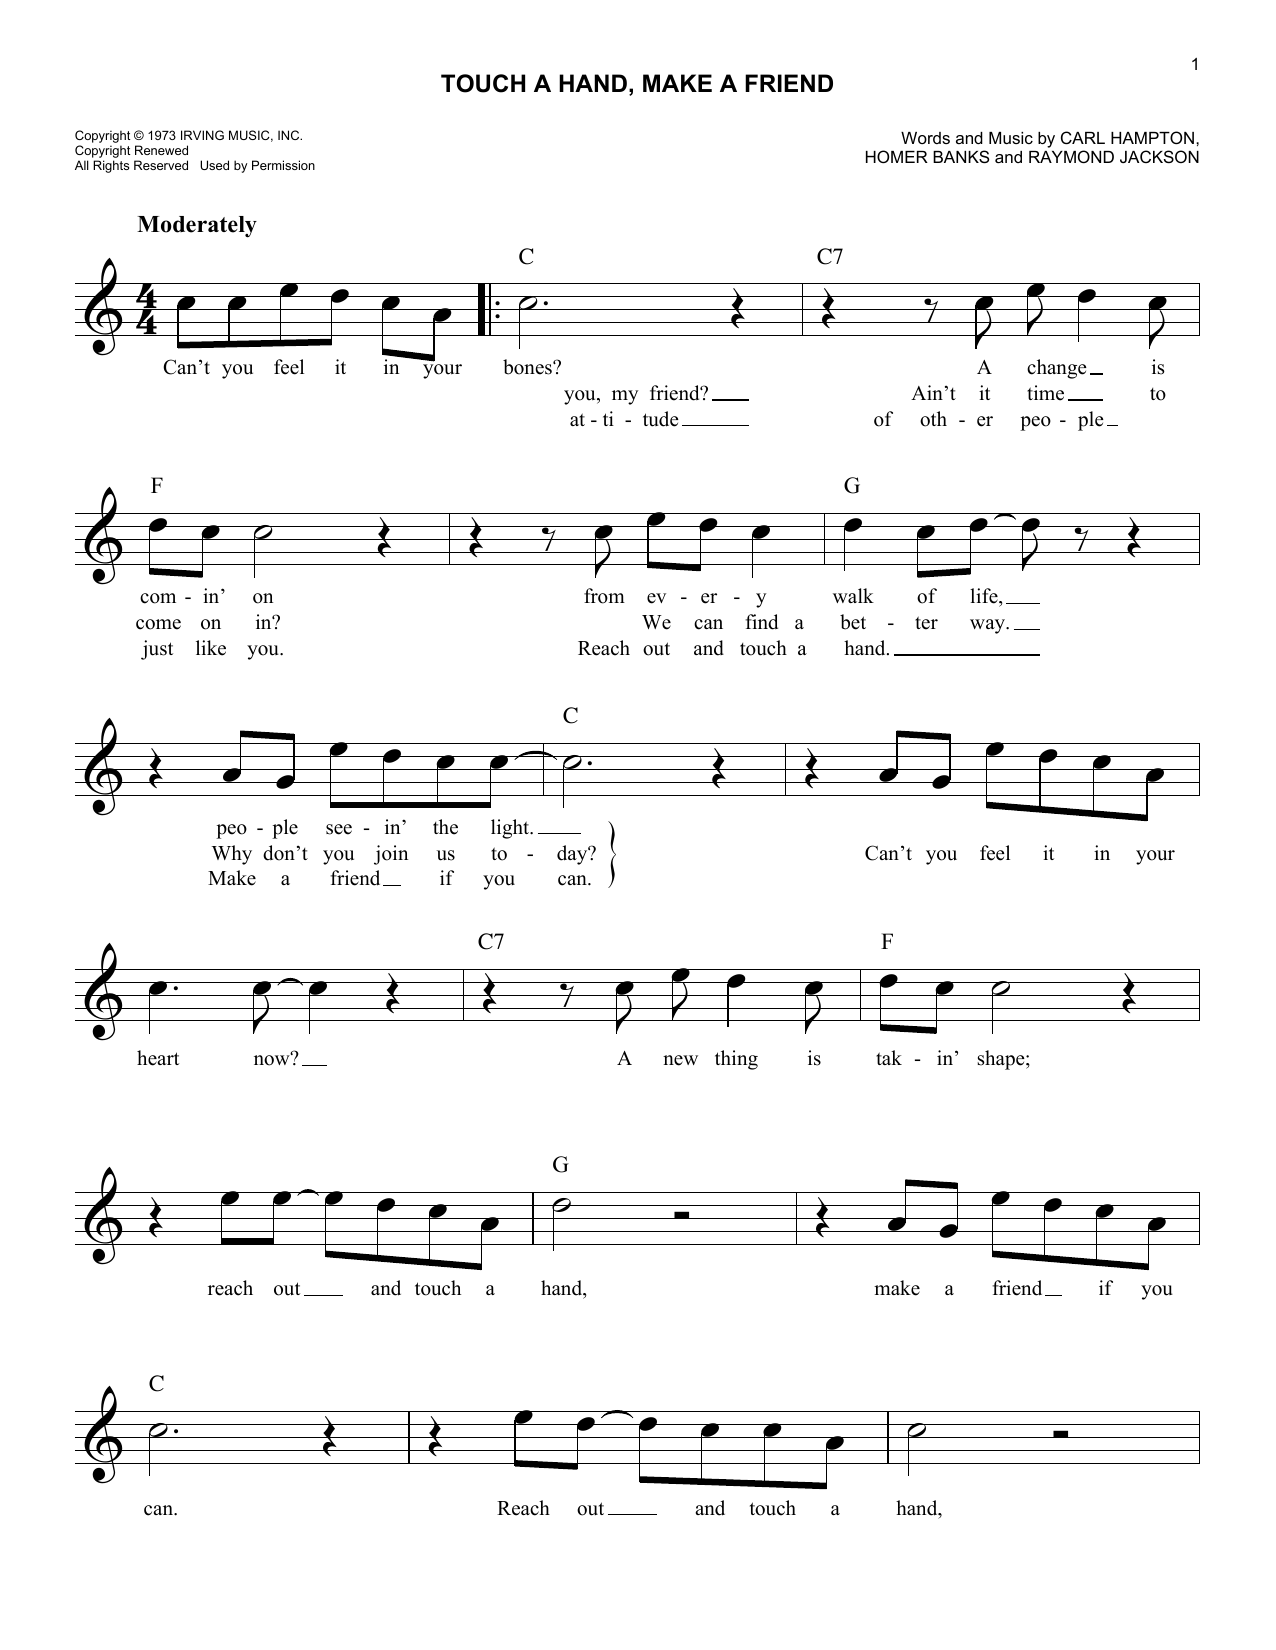 Download The Staple Singers Touch A Hand, Make A Friend Sheet Music